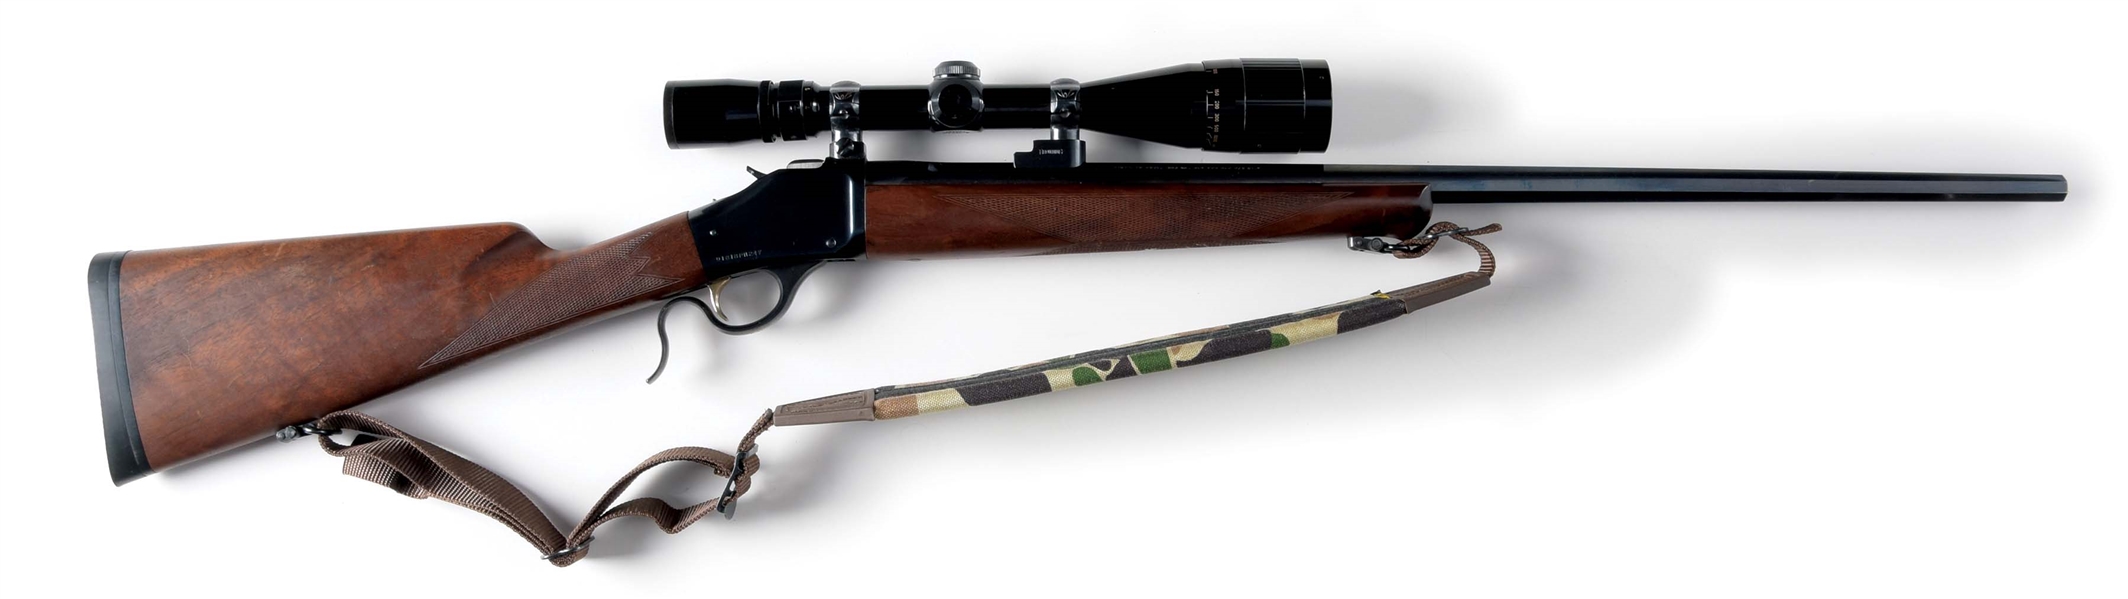 (M) BROWNING MODEL 1885 HIGH WALL LEVER ACTION RIFLE WITH SCOPE (1989).